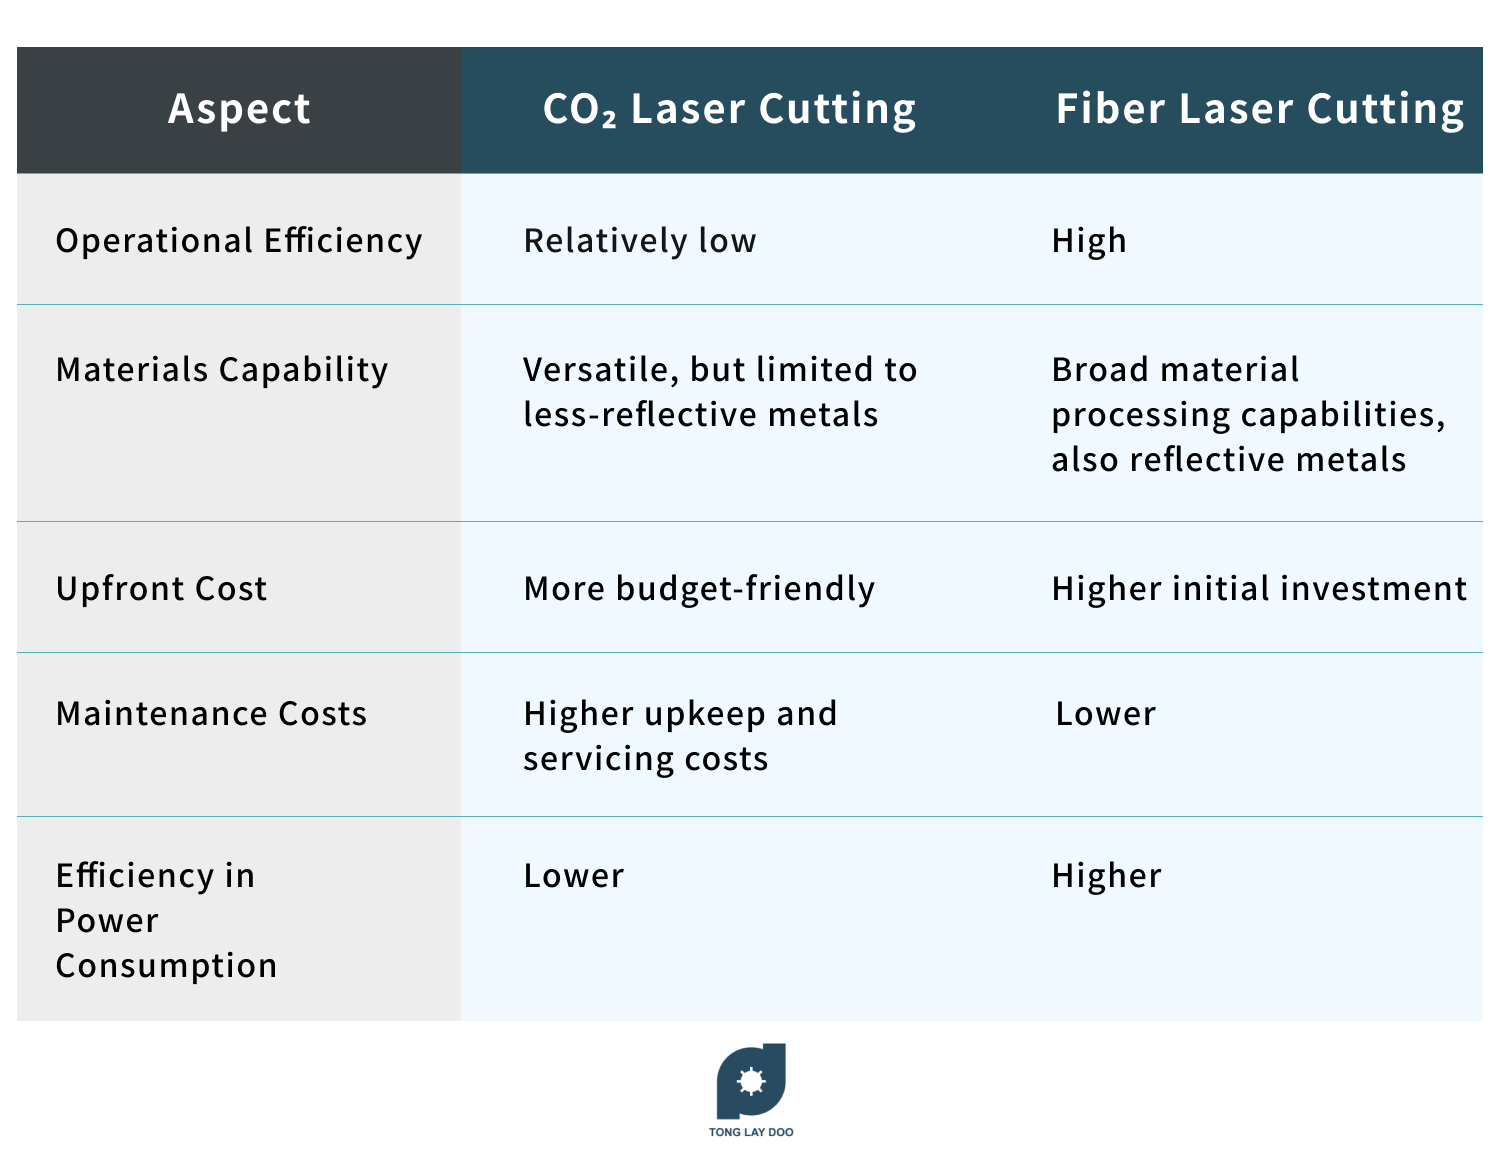  Explore the choice between Fiber and CO₂ laser cutters for metals, weighing material needs, budget limits, and maintenance. Fiber excels with copper and aluminum, handling reflective metals effectively. CO₂ suits steel but struggles with reflectivity. Despite higher upfront costs for Fiber, ongoing expenses differ, favoring Fiber for various materials with adequate budgets.